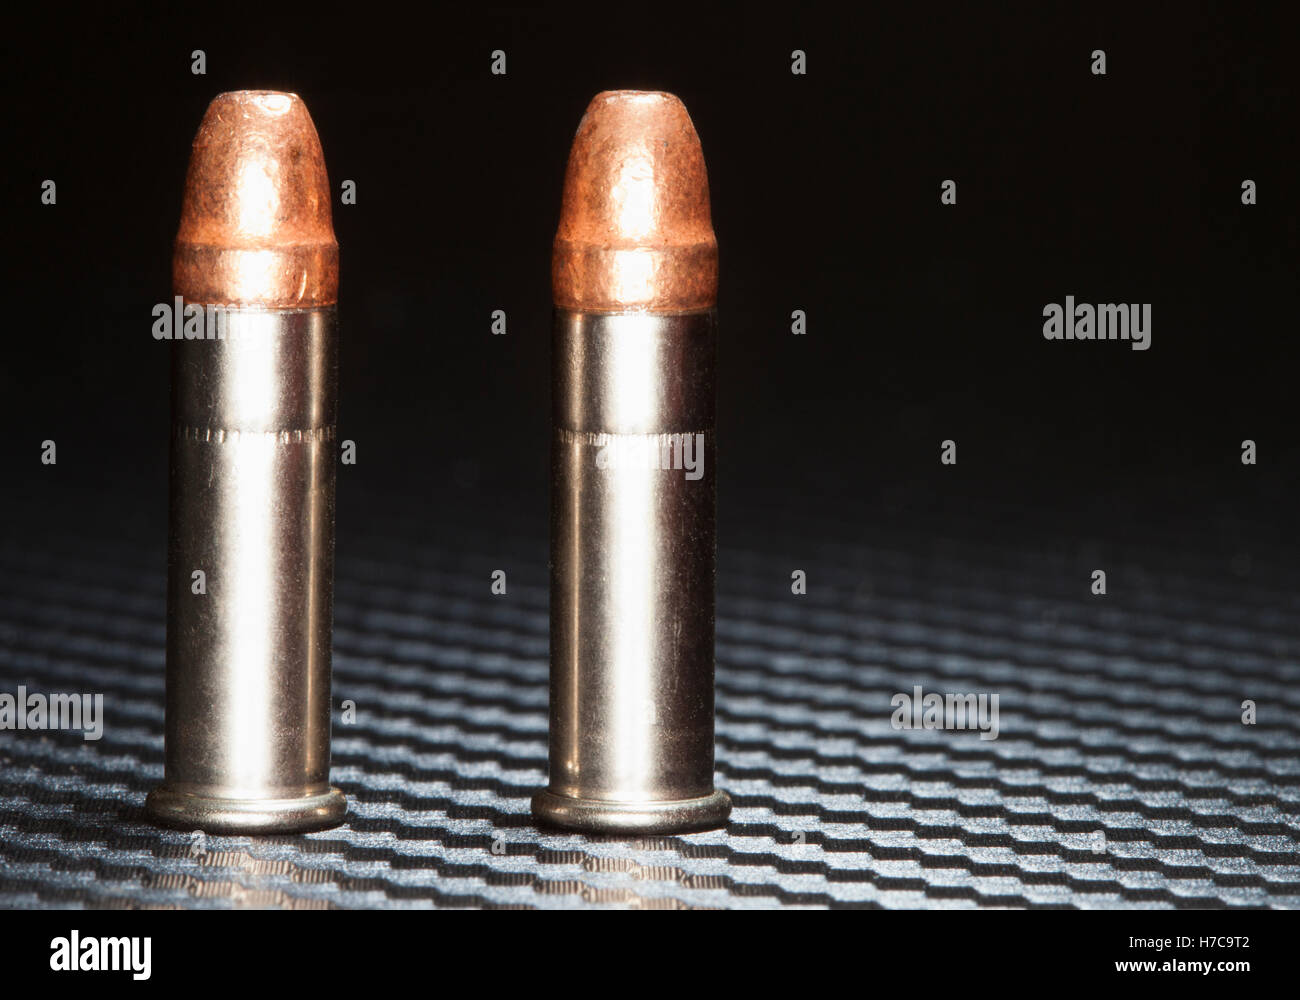 Ammunition with copper plated bullets for rim fire guns Stock Photo